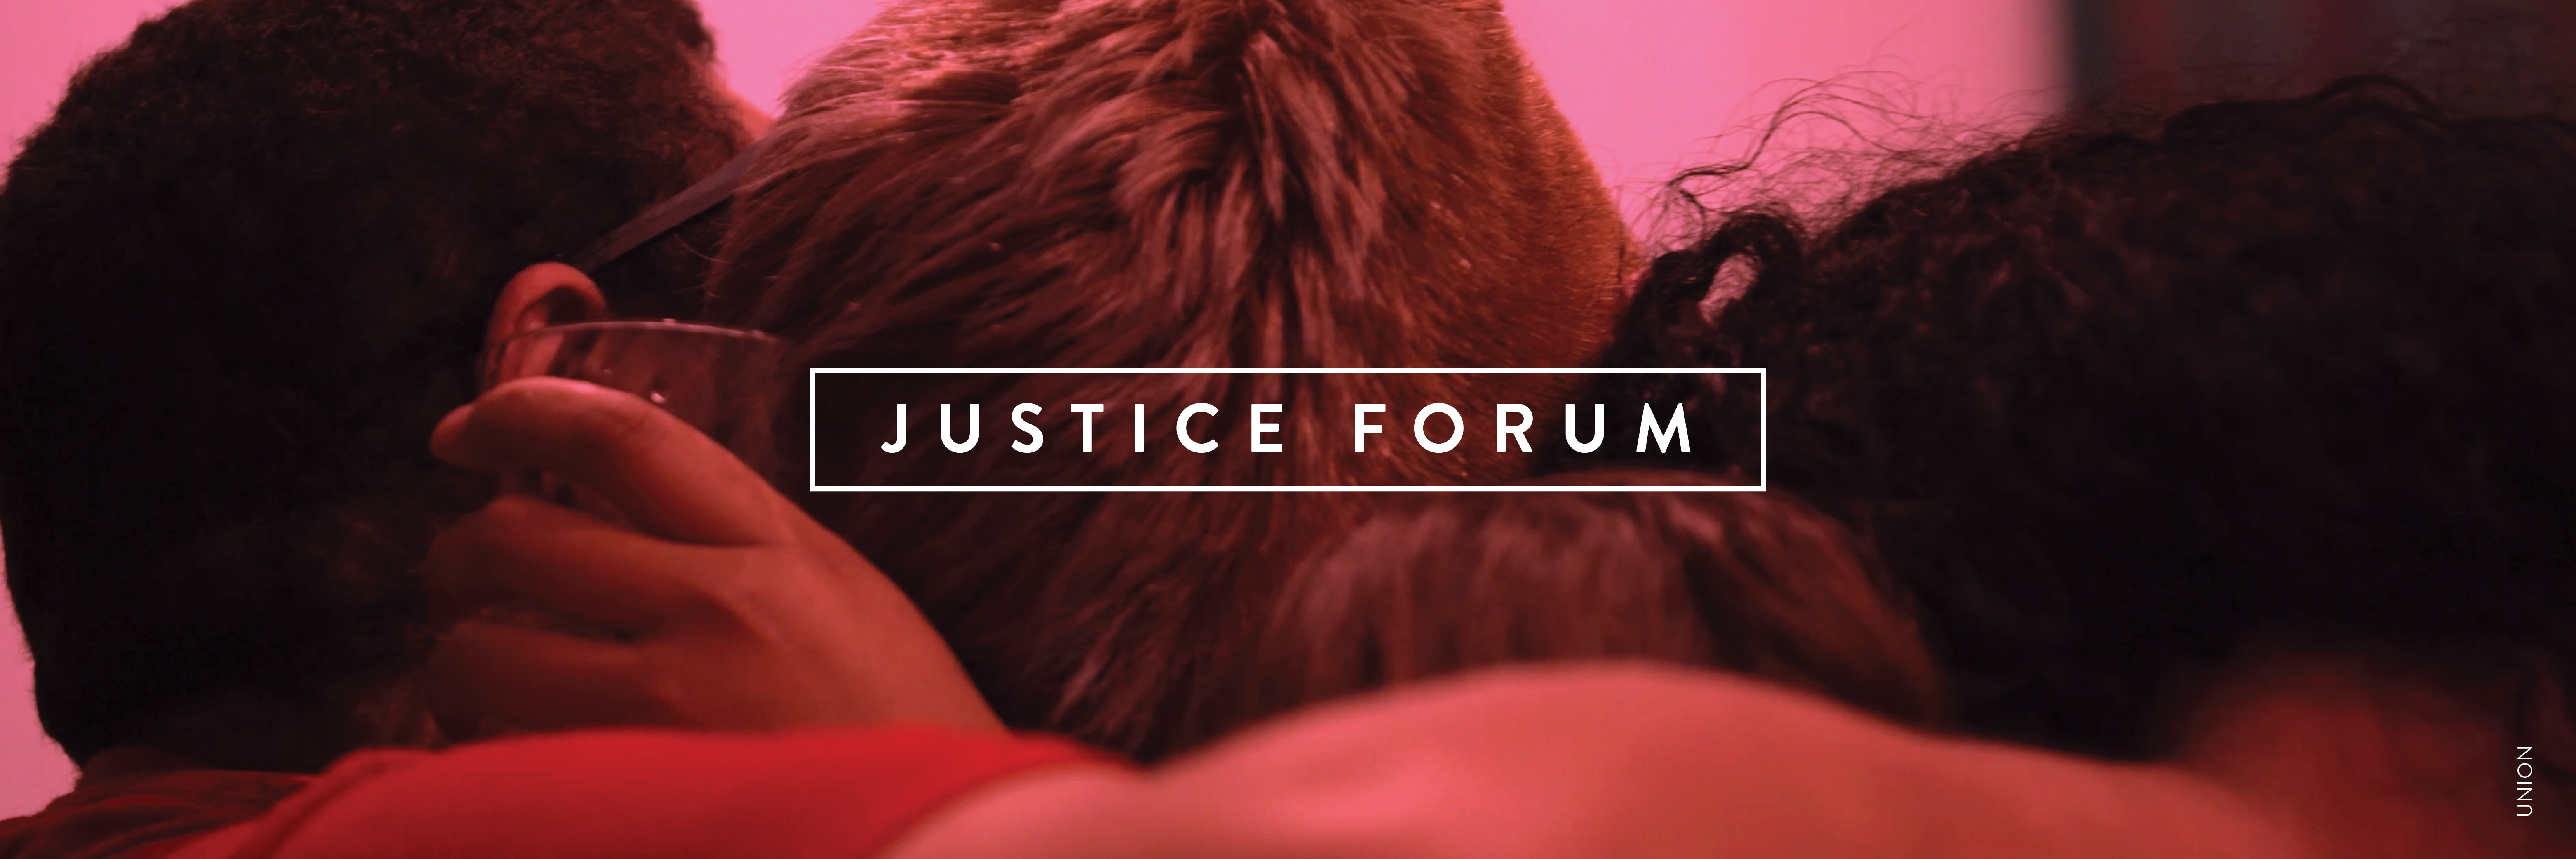 Three peoples' heads are pressed close together; faces are not visible, and they appear to be hugging each other in a huddle. The light is reddish pink. White text over the image reads: JUSTICE FORUM